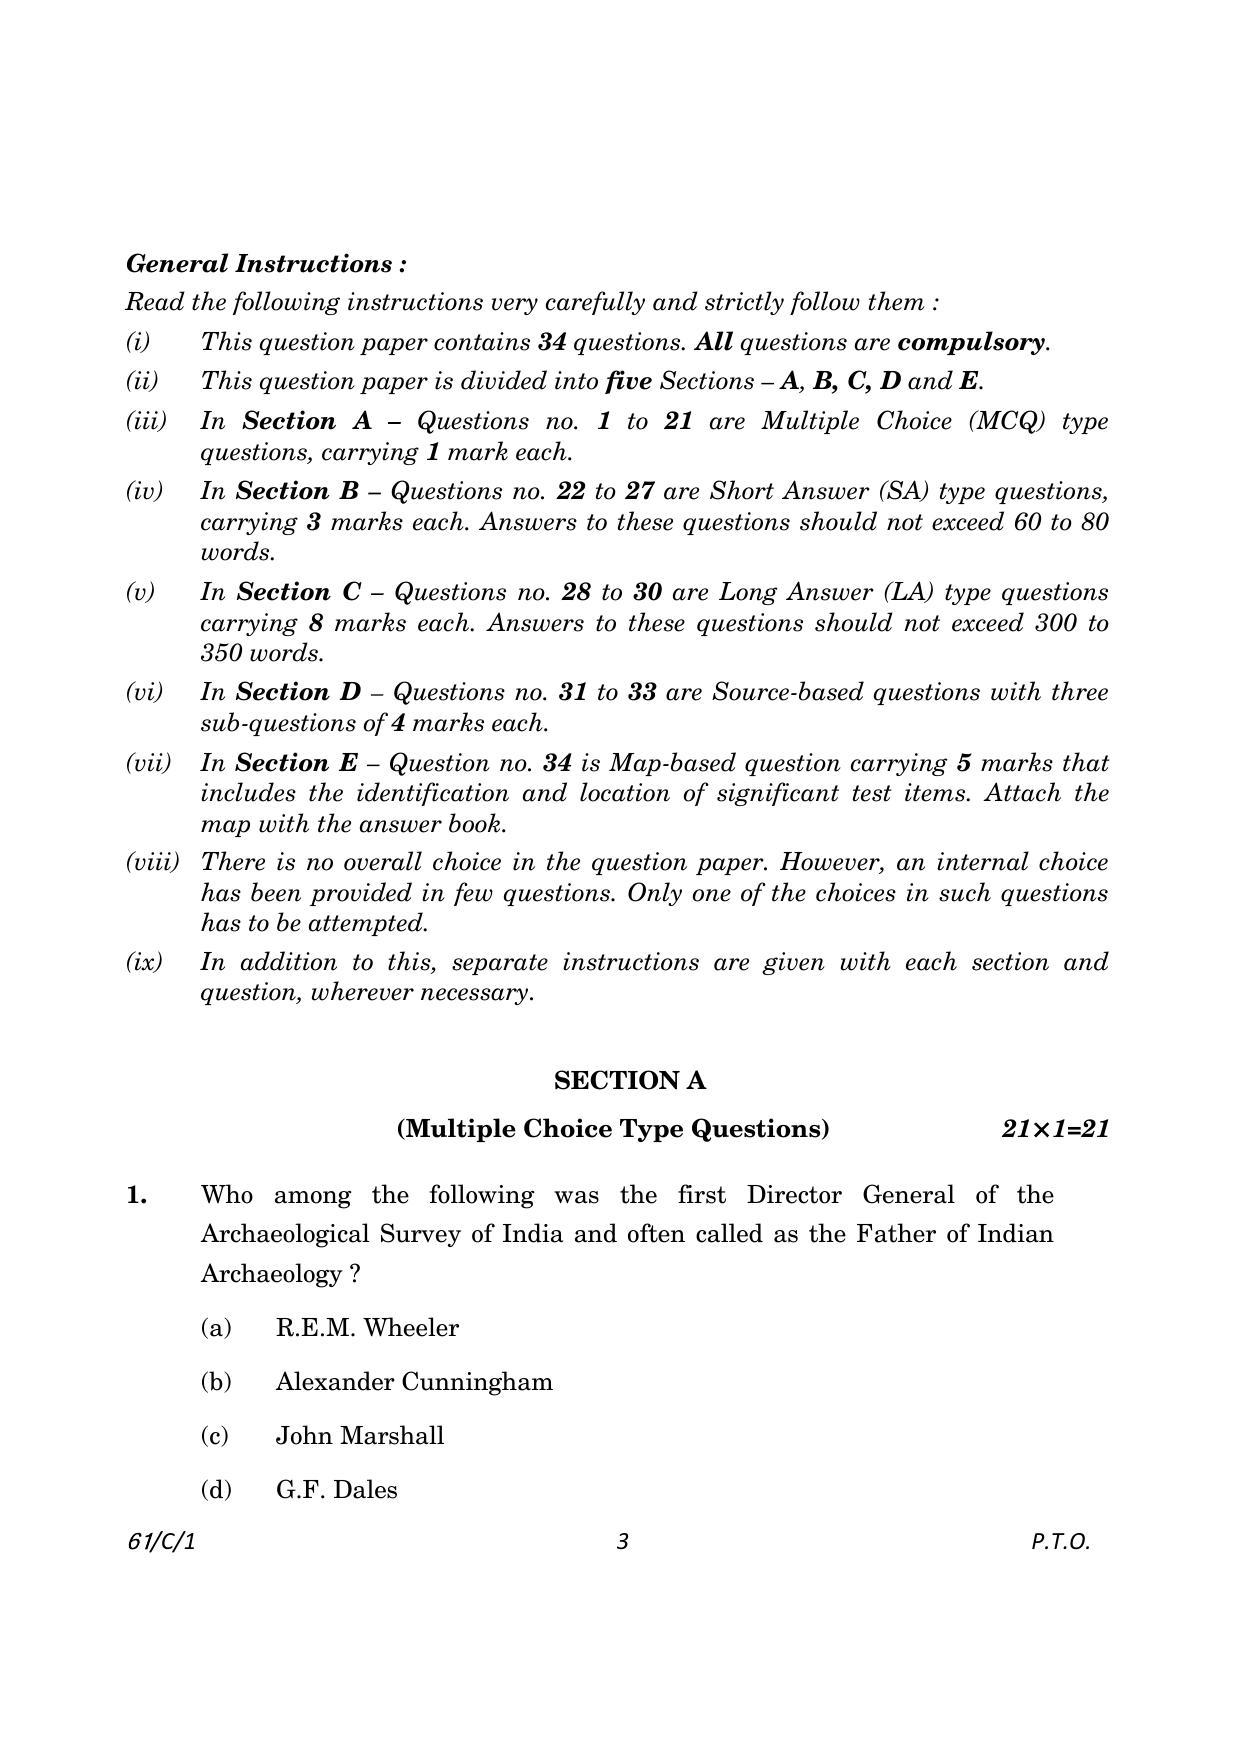 CBSE Class 12 61-1 History 2023 (Compartment) Question Paper - Page 3